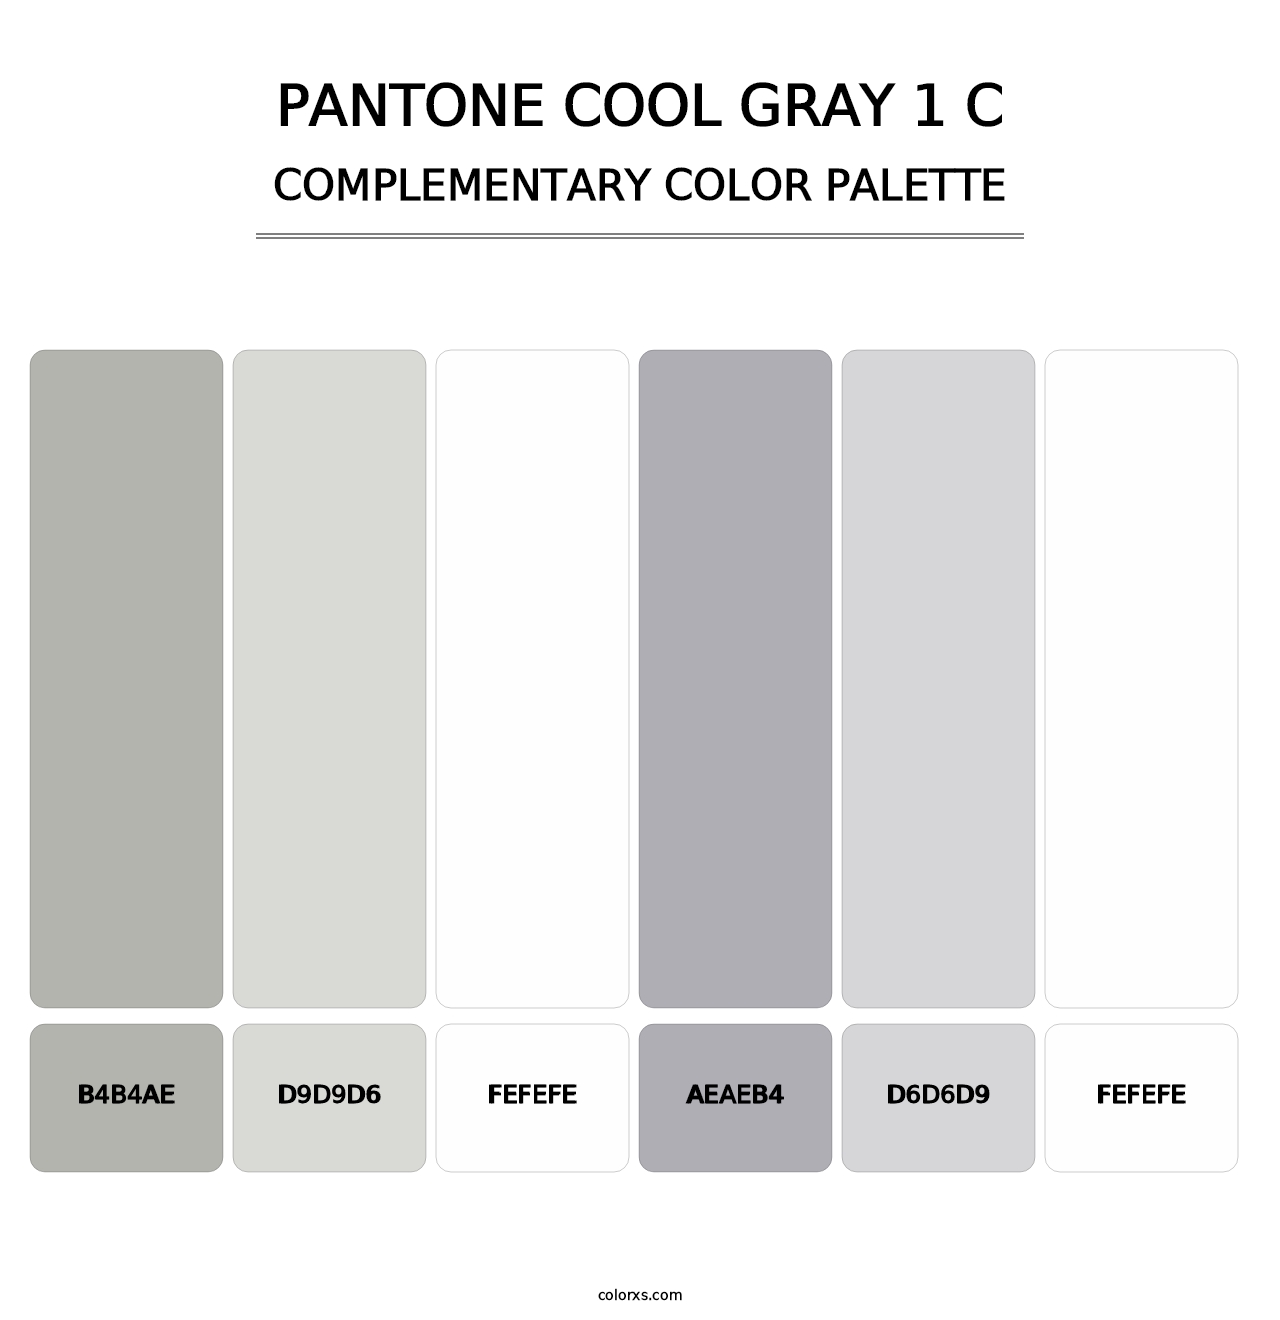 PANTONE Cool Gray 1 C - Complementary Color Palette